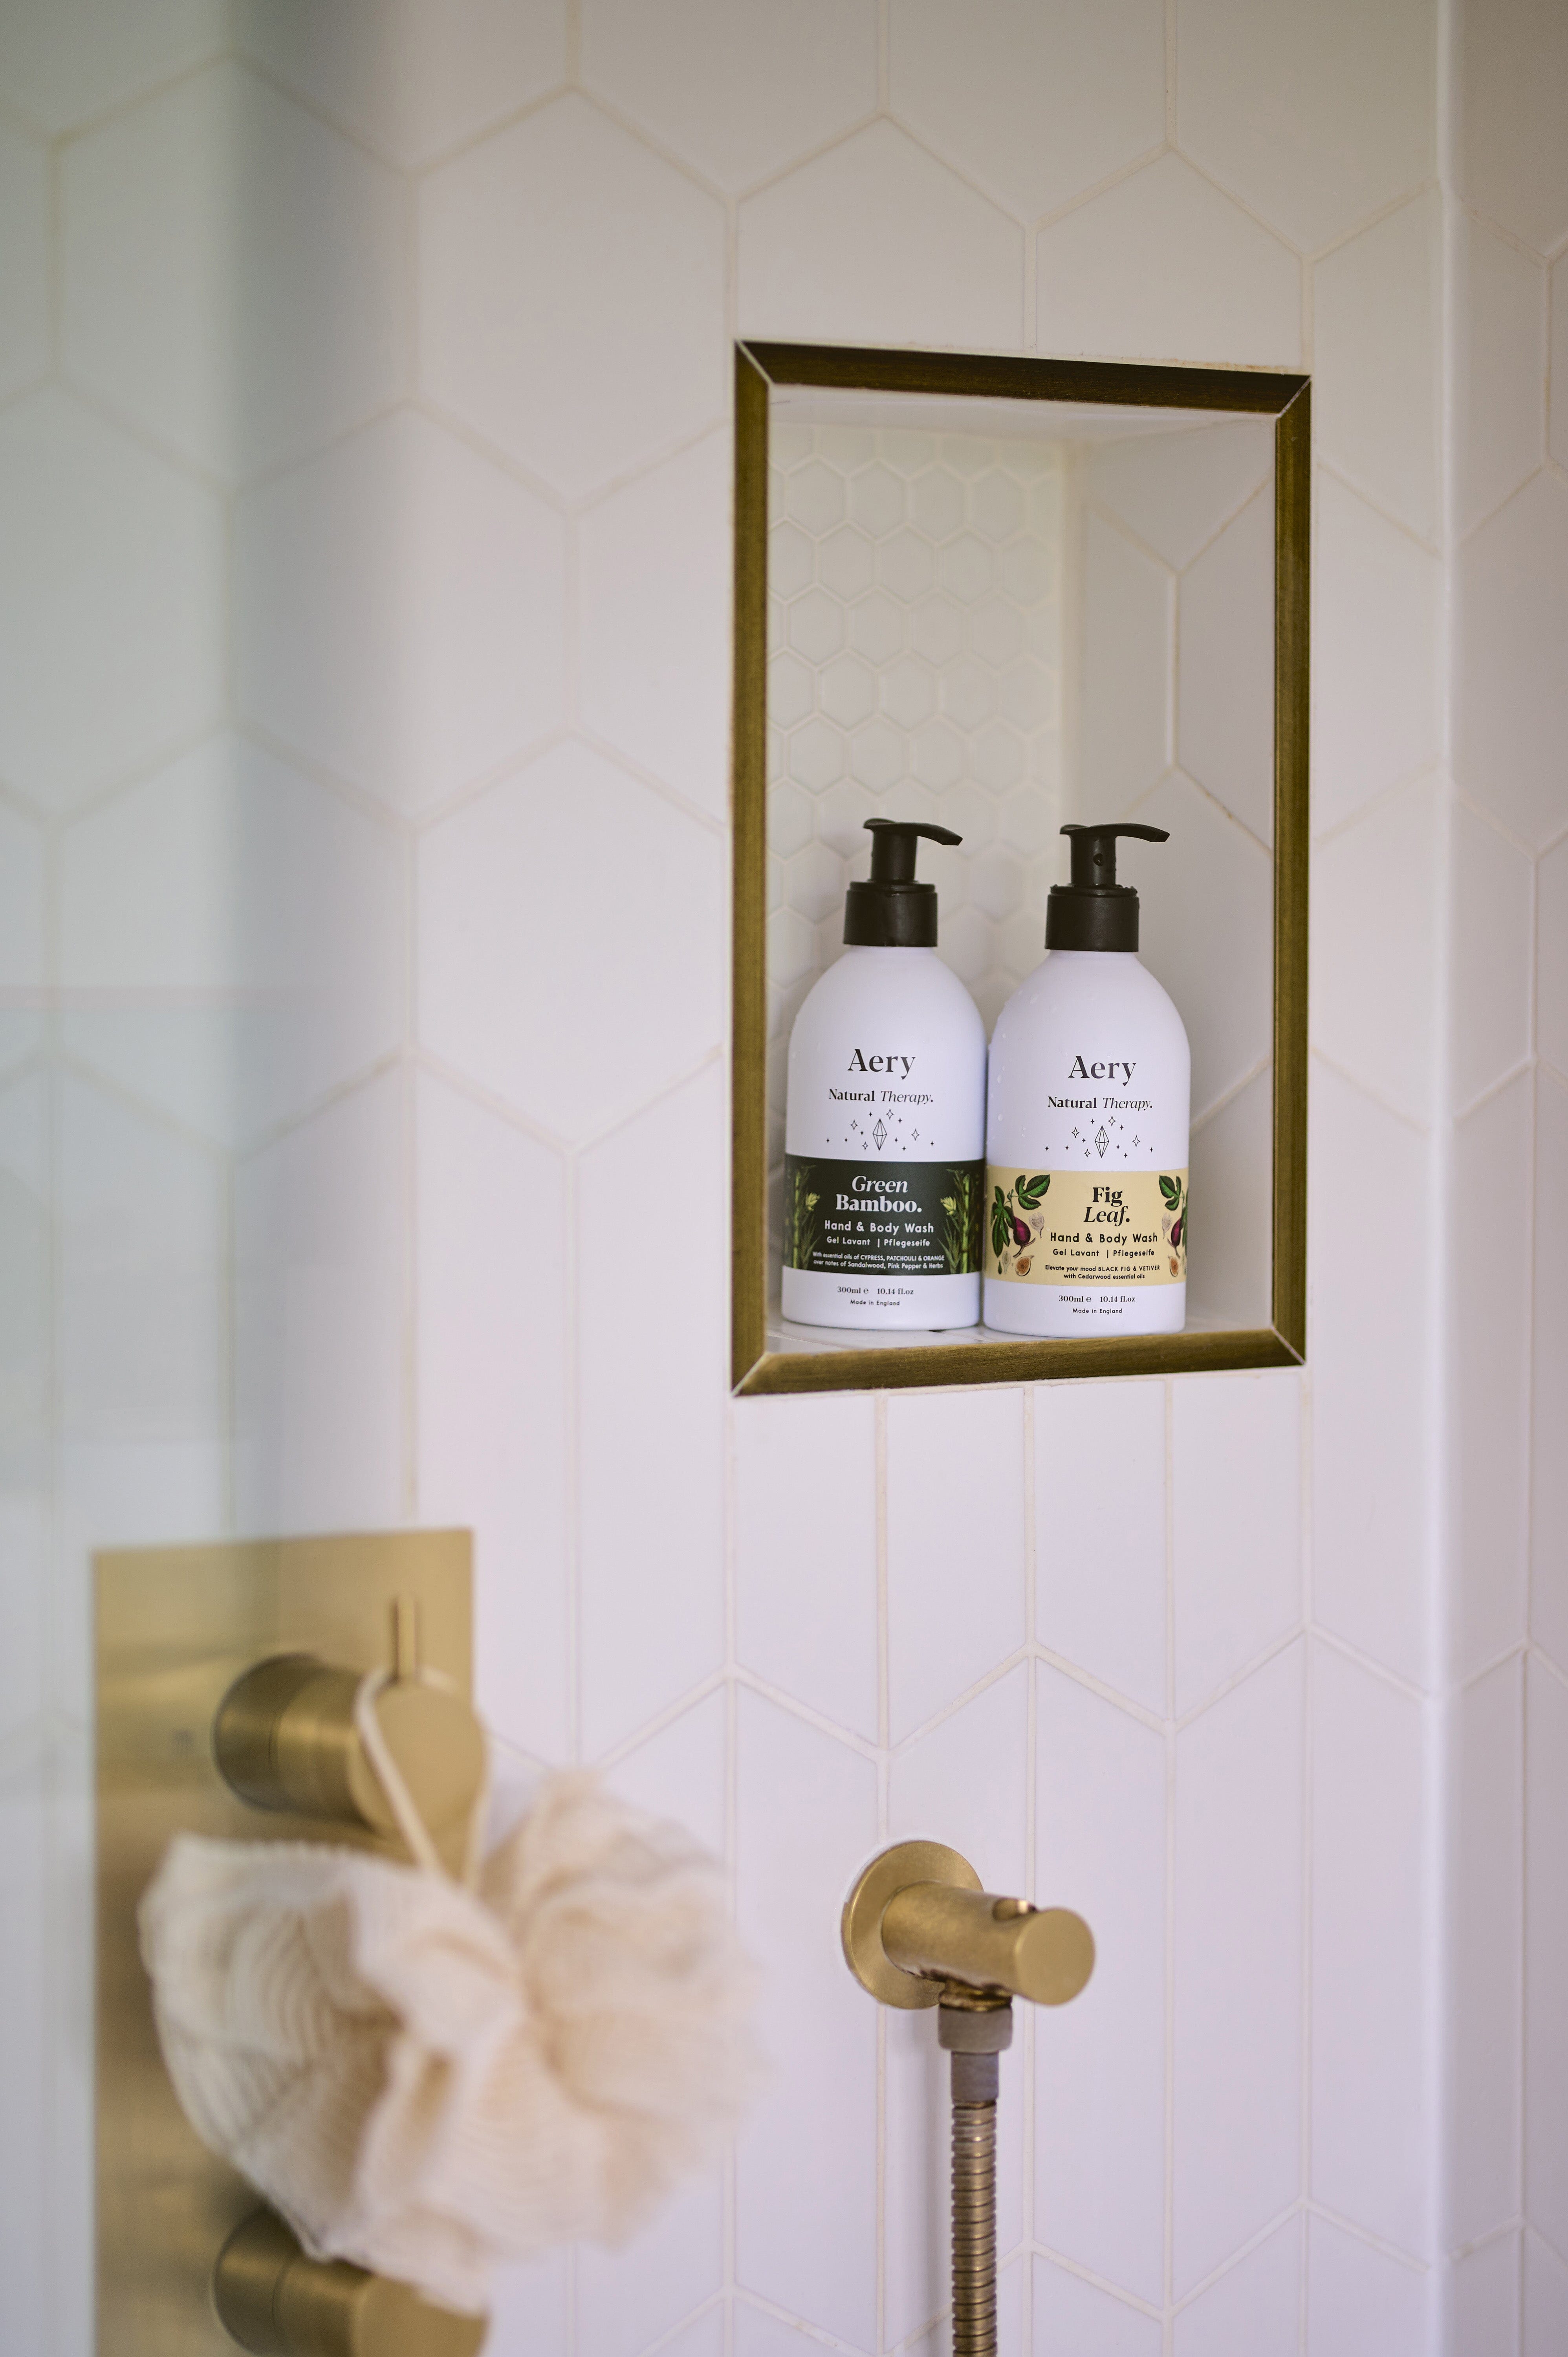 Cream Fig Leaf hand wash displayed next to Green Bamboo hand wash by Aery placed on shelf in shower 